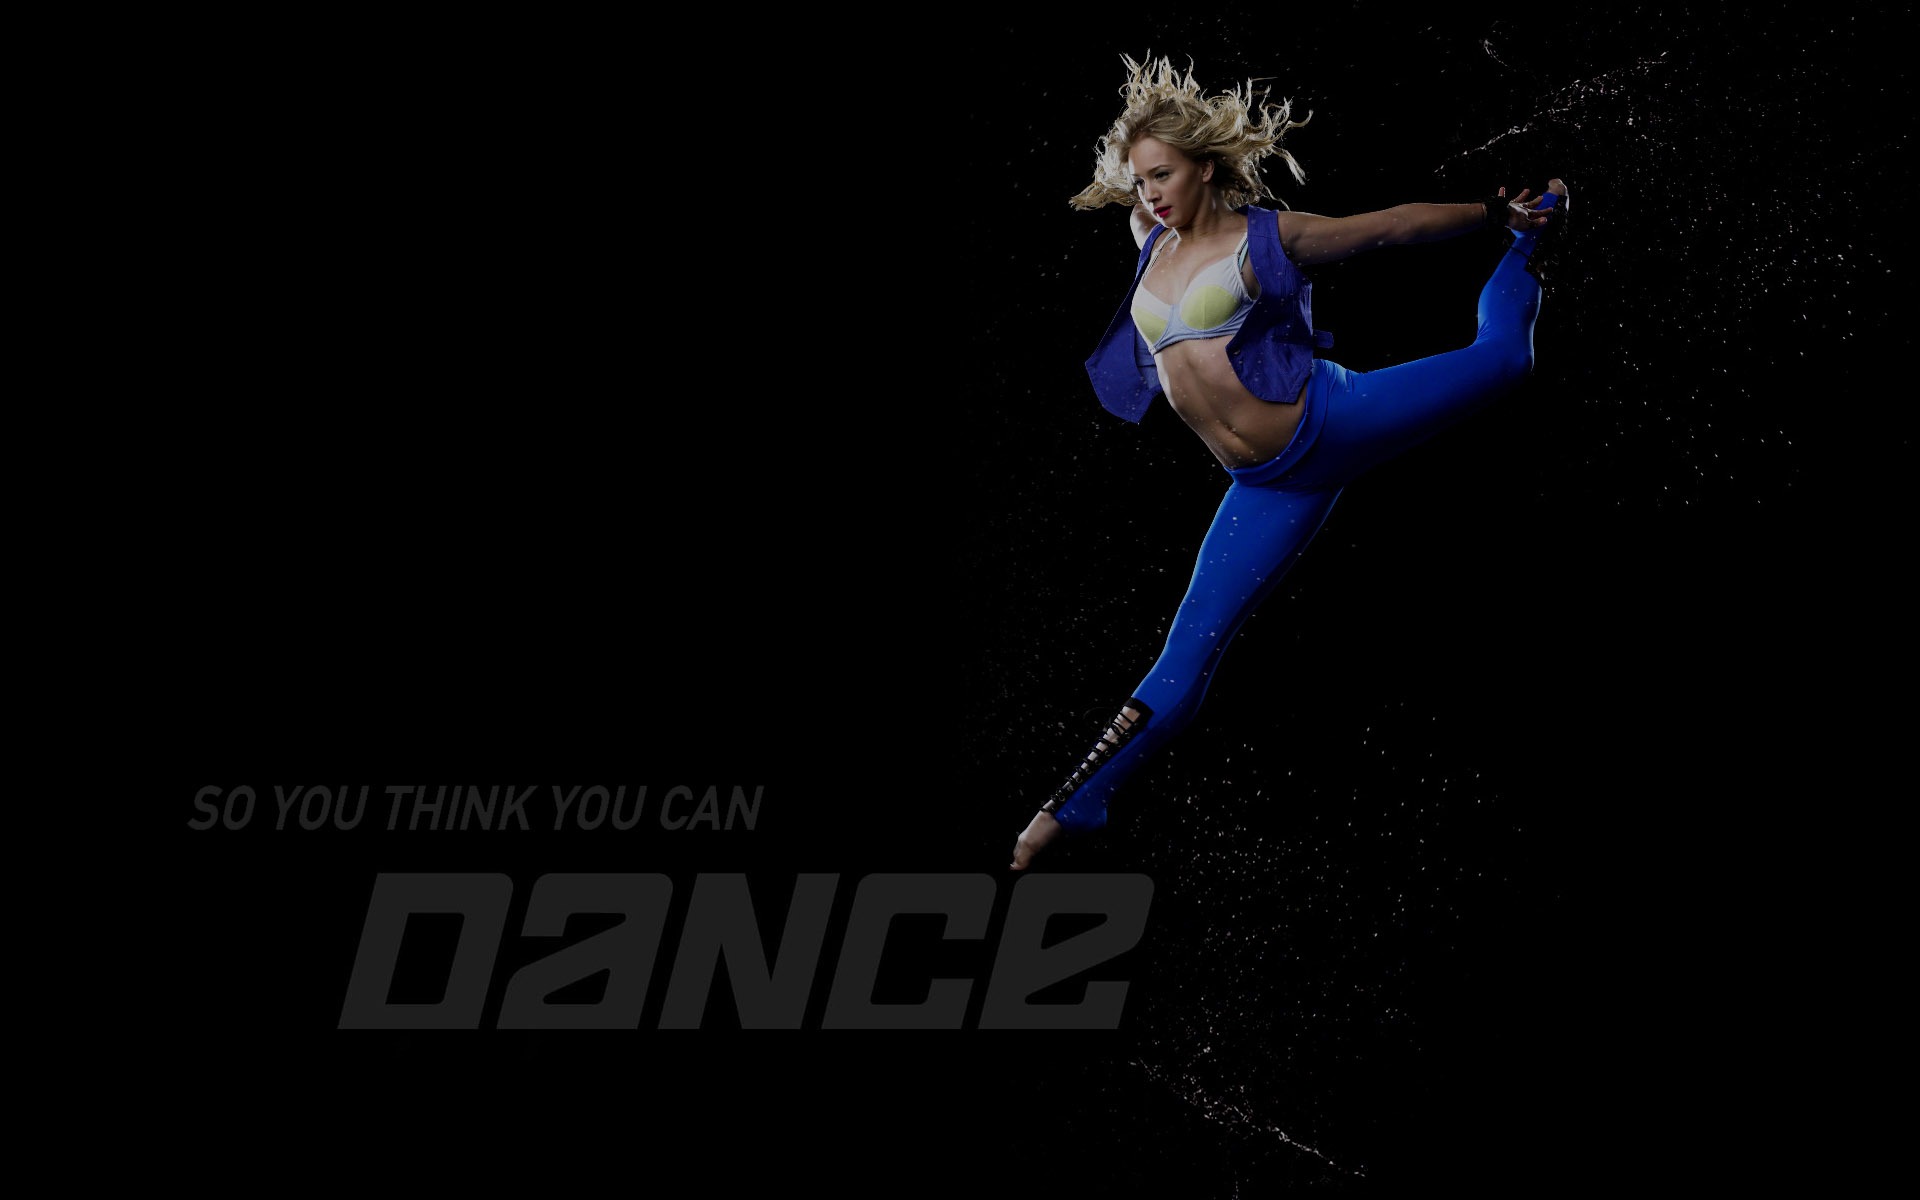 So You Think You Can Dance wallpaper (2) #19 - 1920x1200